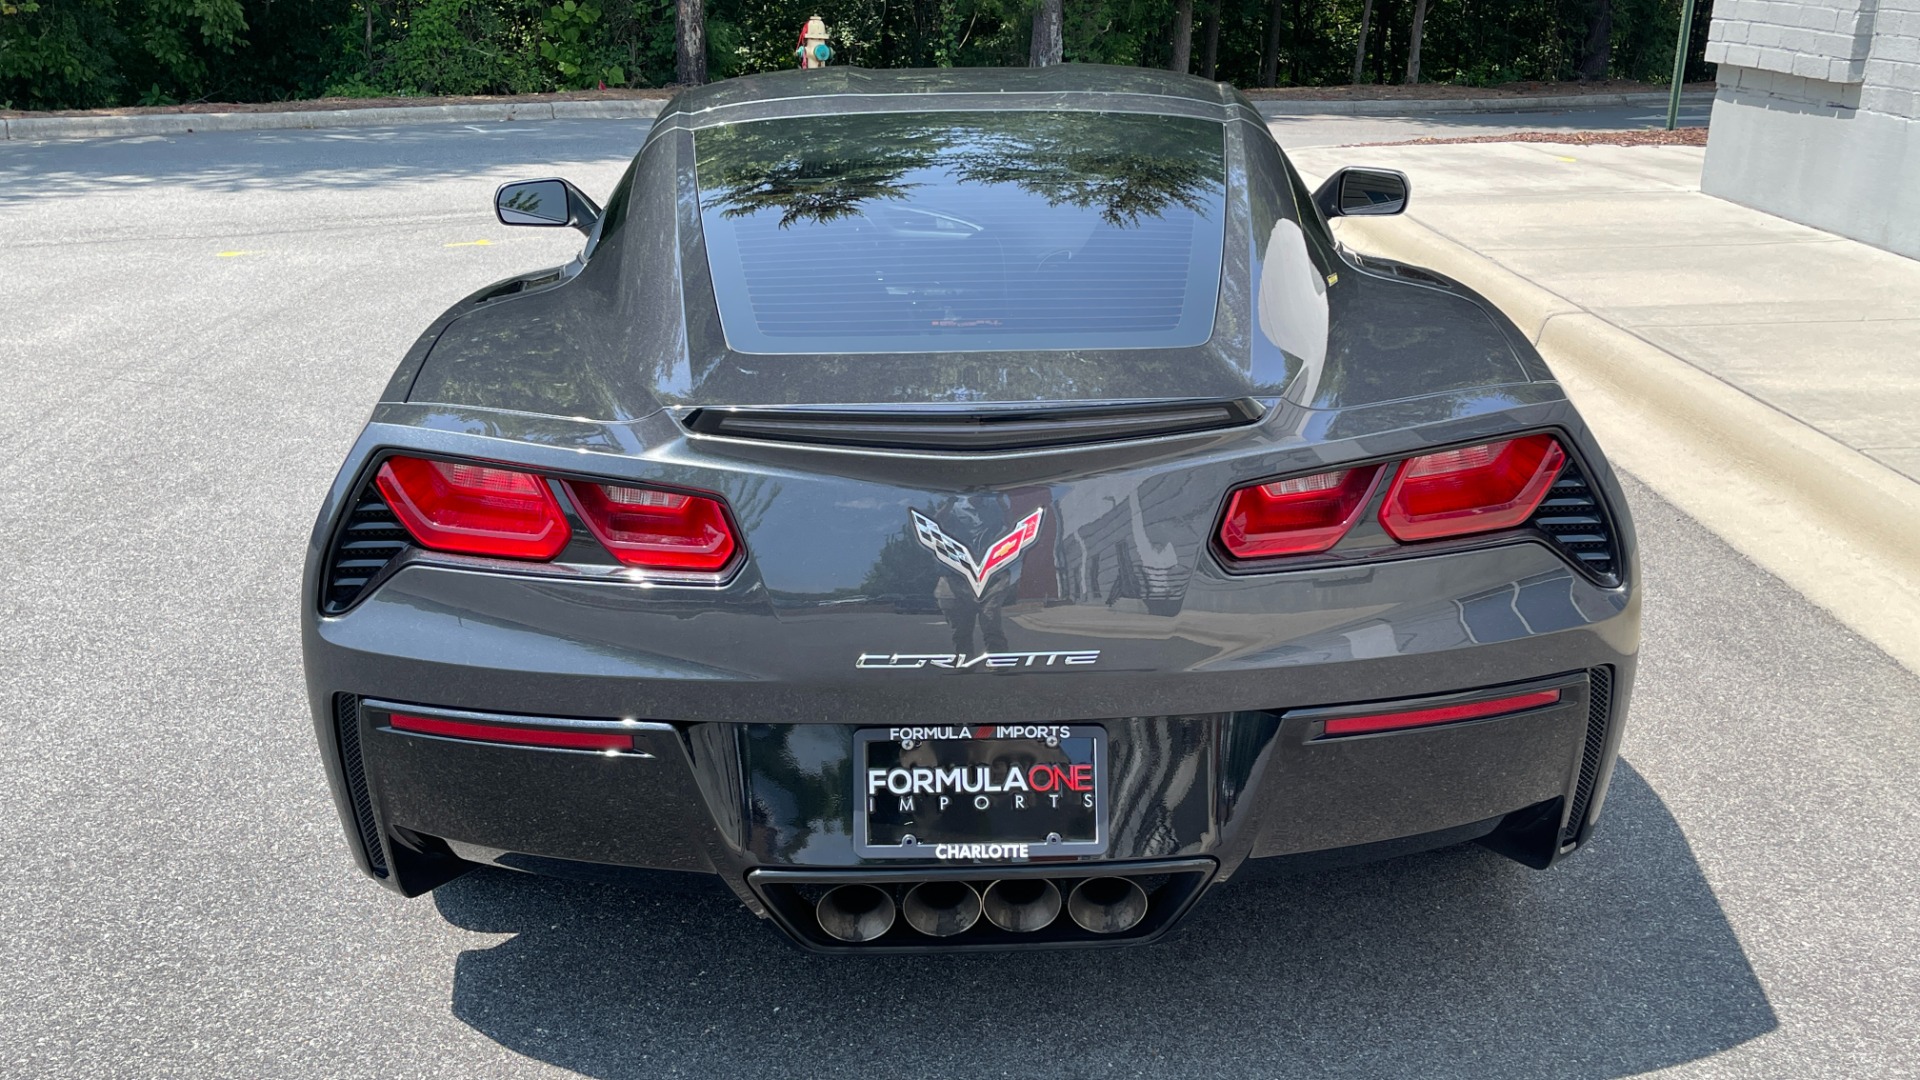 Used 2017 Chevrolet Corvette 1LT / 8SPD AUTO / 6.2L V8 / REMOTE START / PADDLE SHIFTERS for sale $52,995 at Formula Imports in Charlotte NC 28227 22